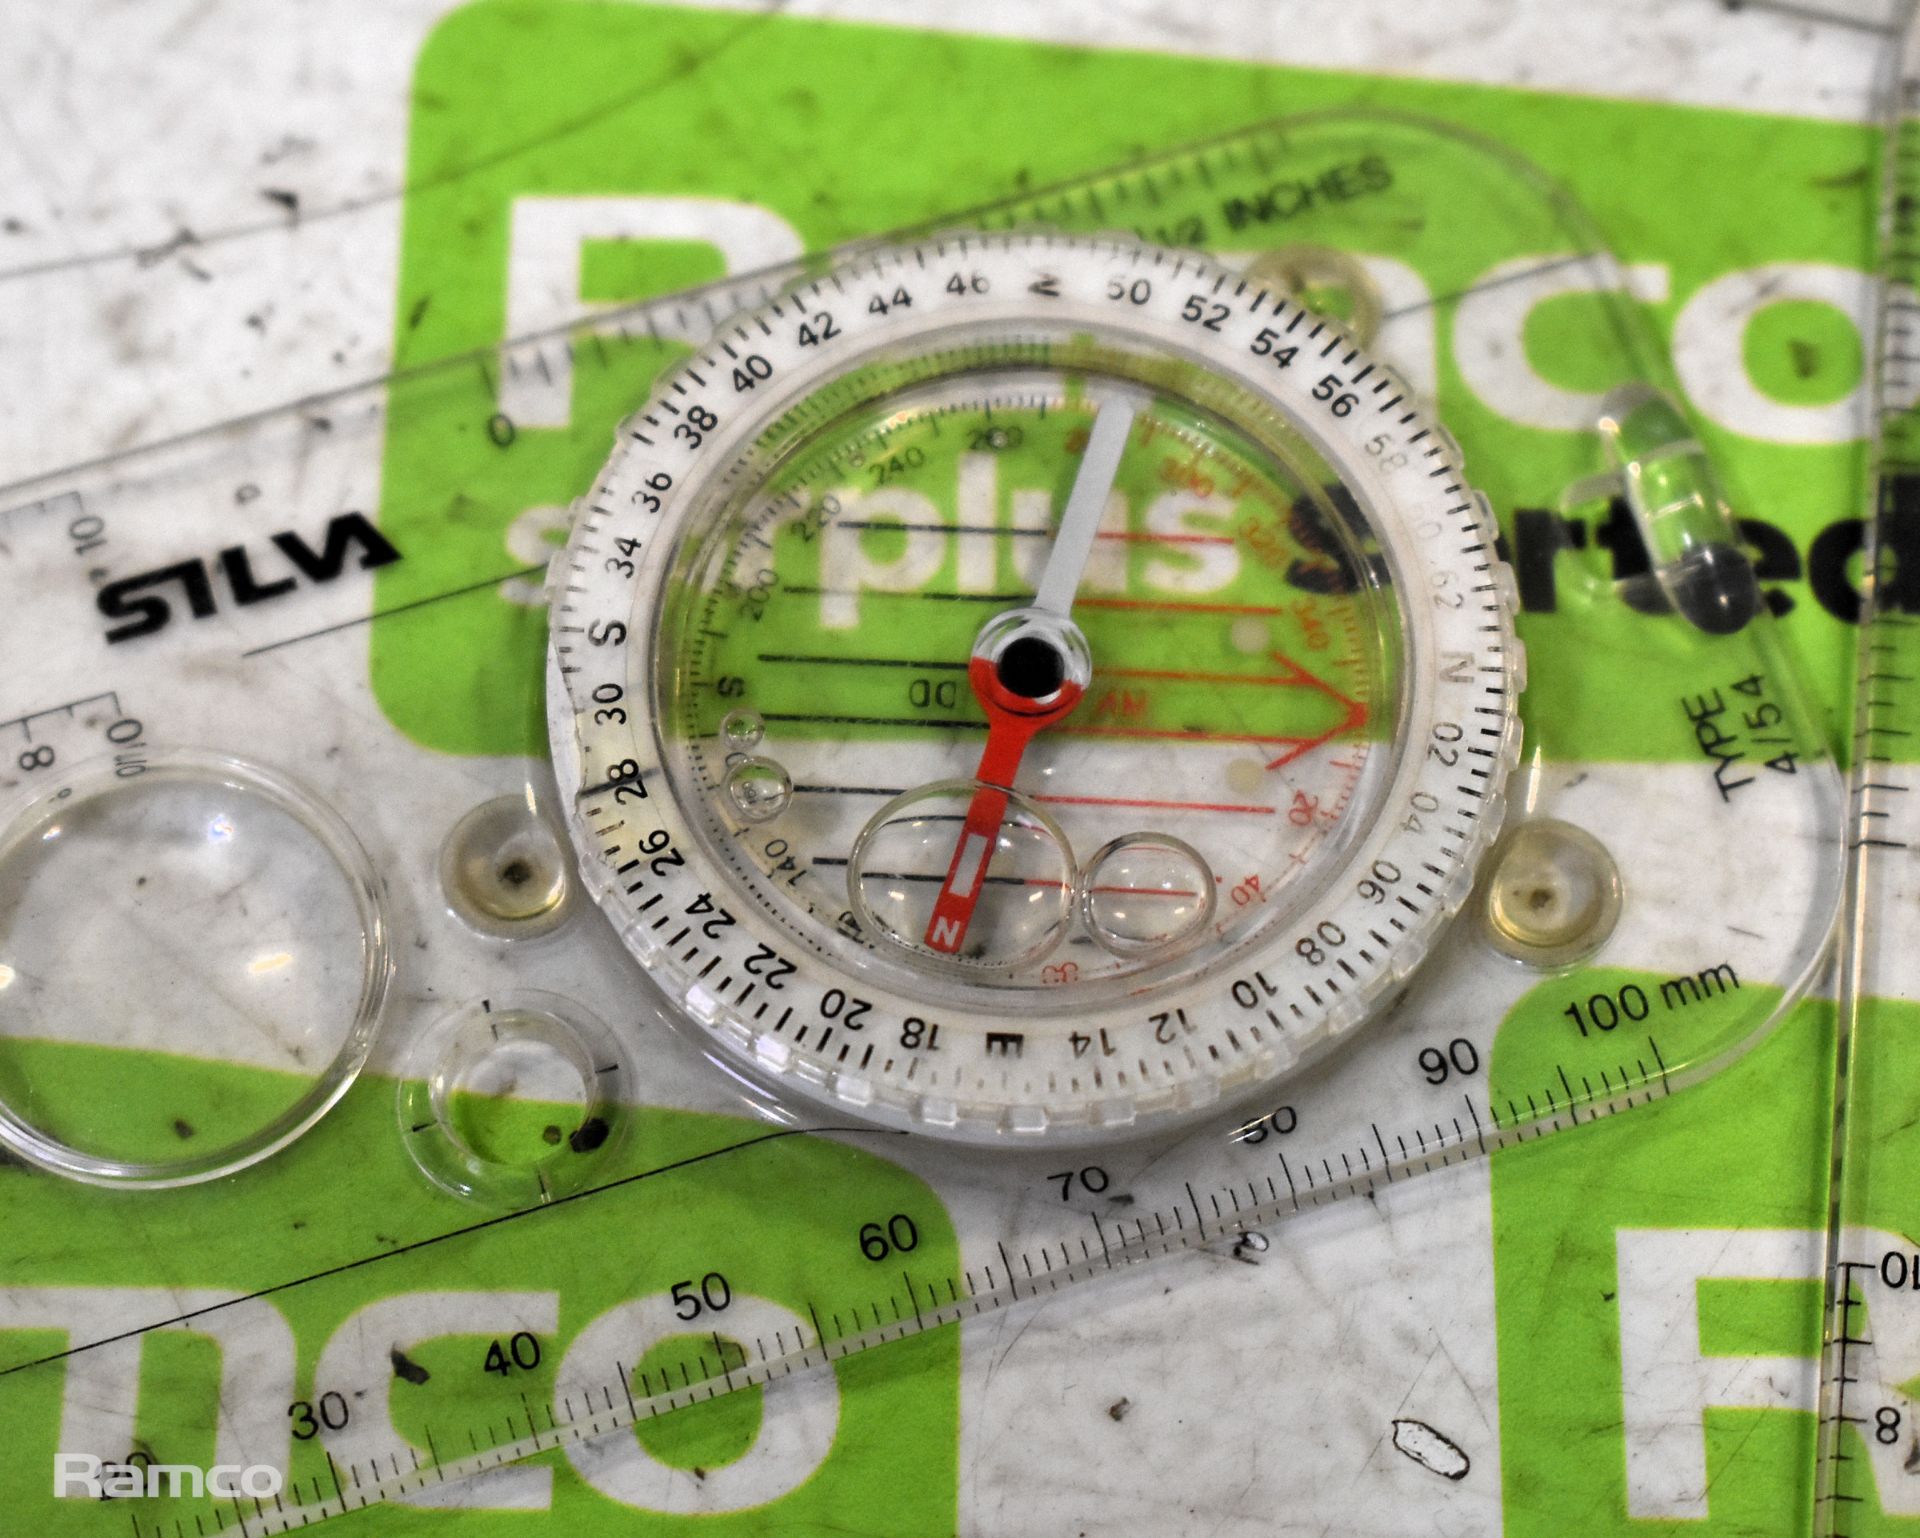 7x Silva 4/54 magnetic compasses, 6x Silva Expedition 4 compasses - Image 2 of 5